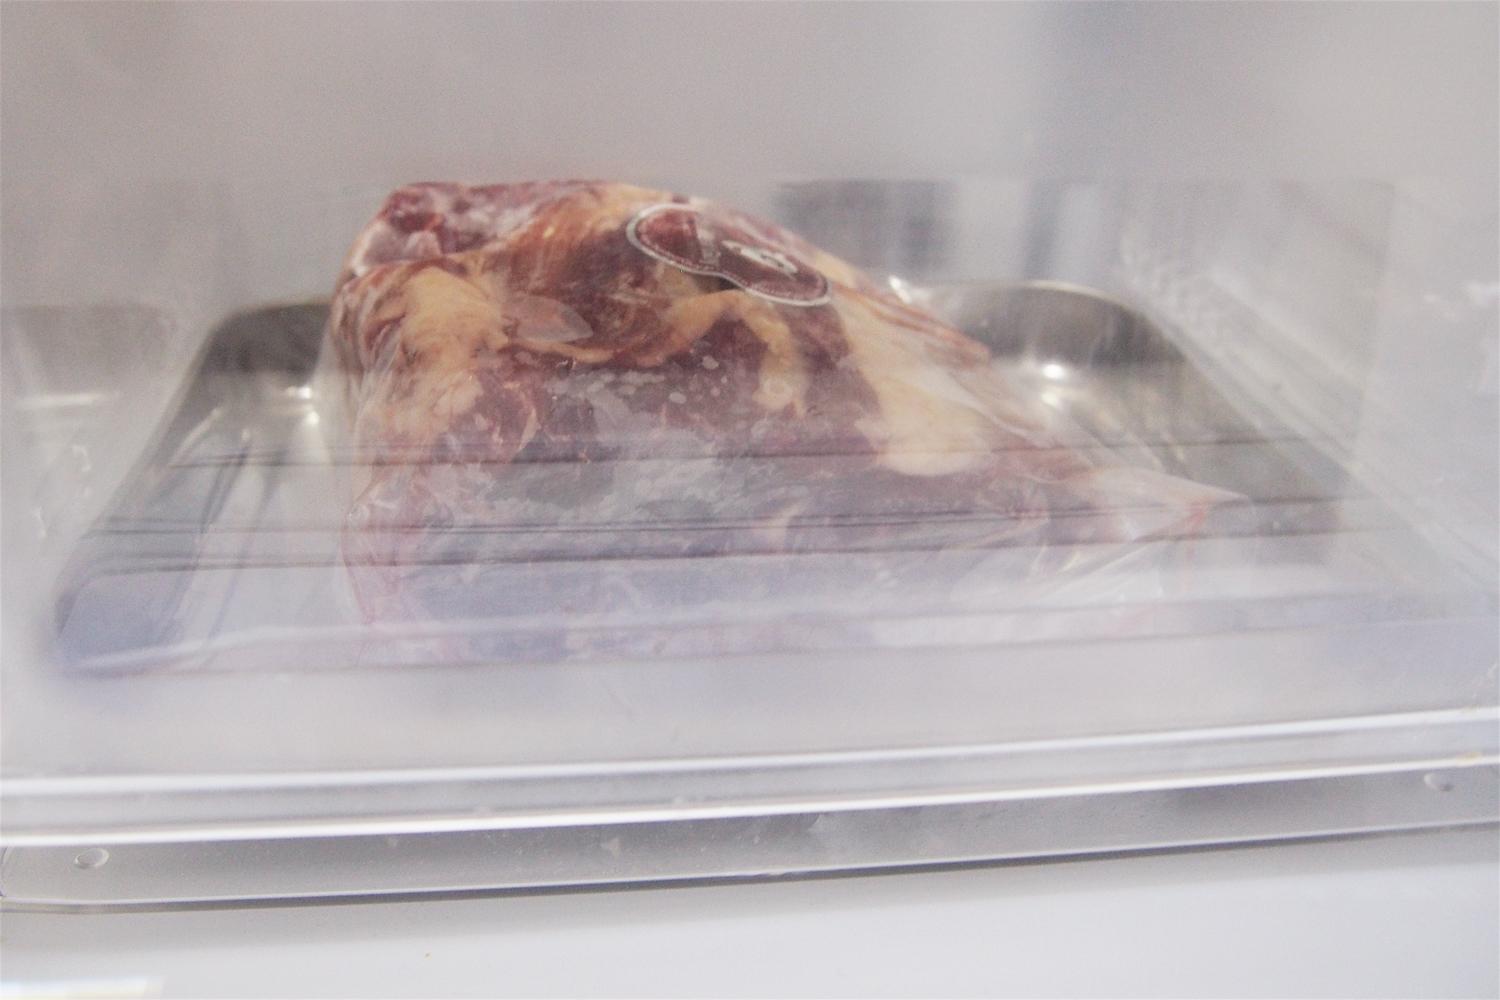 HOW TO DEFROST MEAT: AN EASY WAY TO THAW MEAT SLOWLY IS IN THE CHILLER